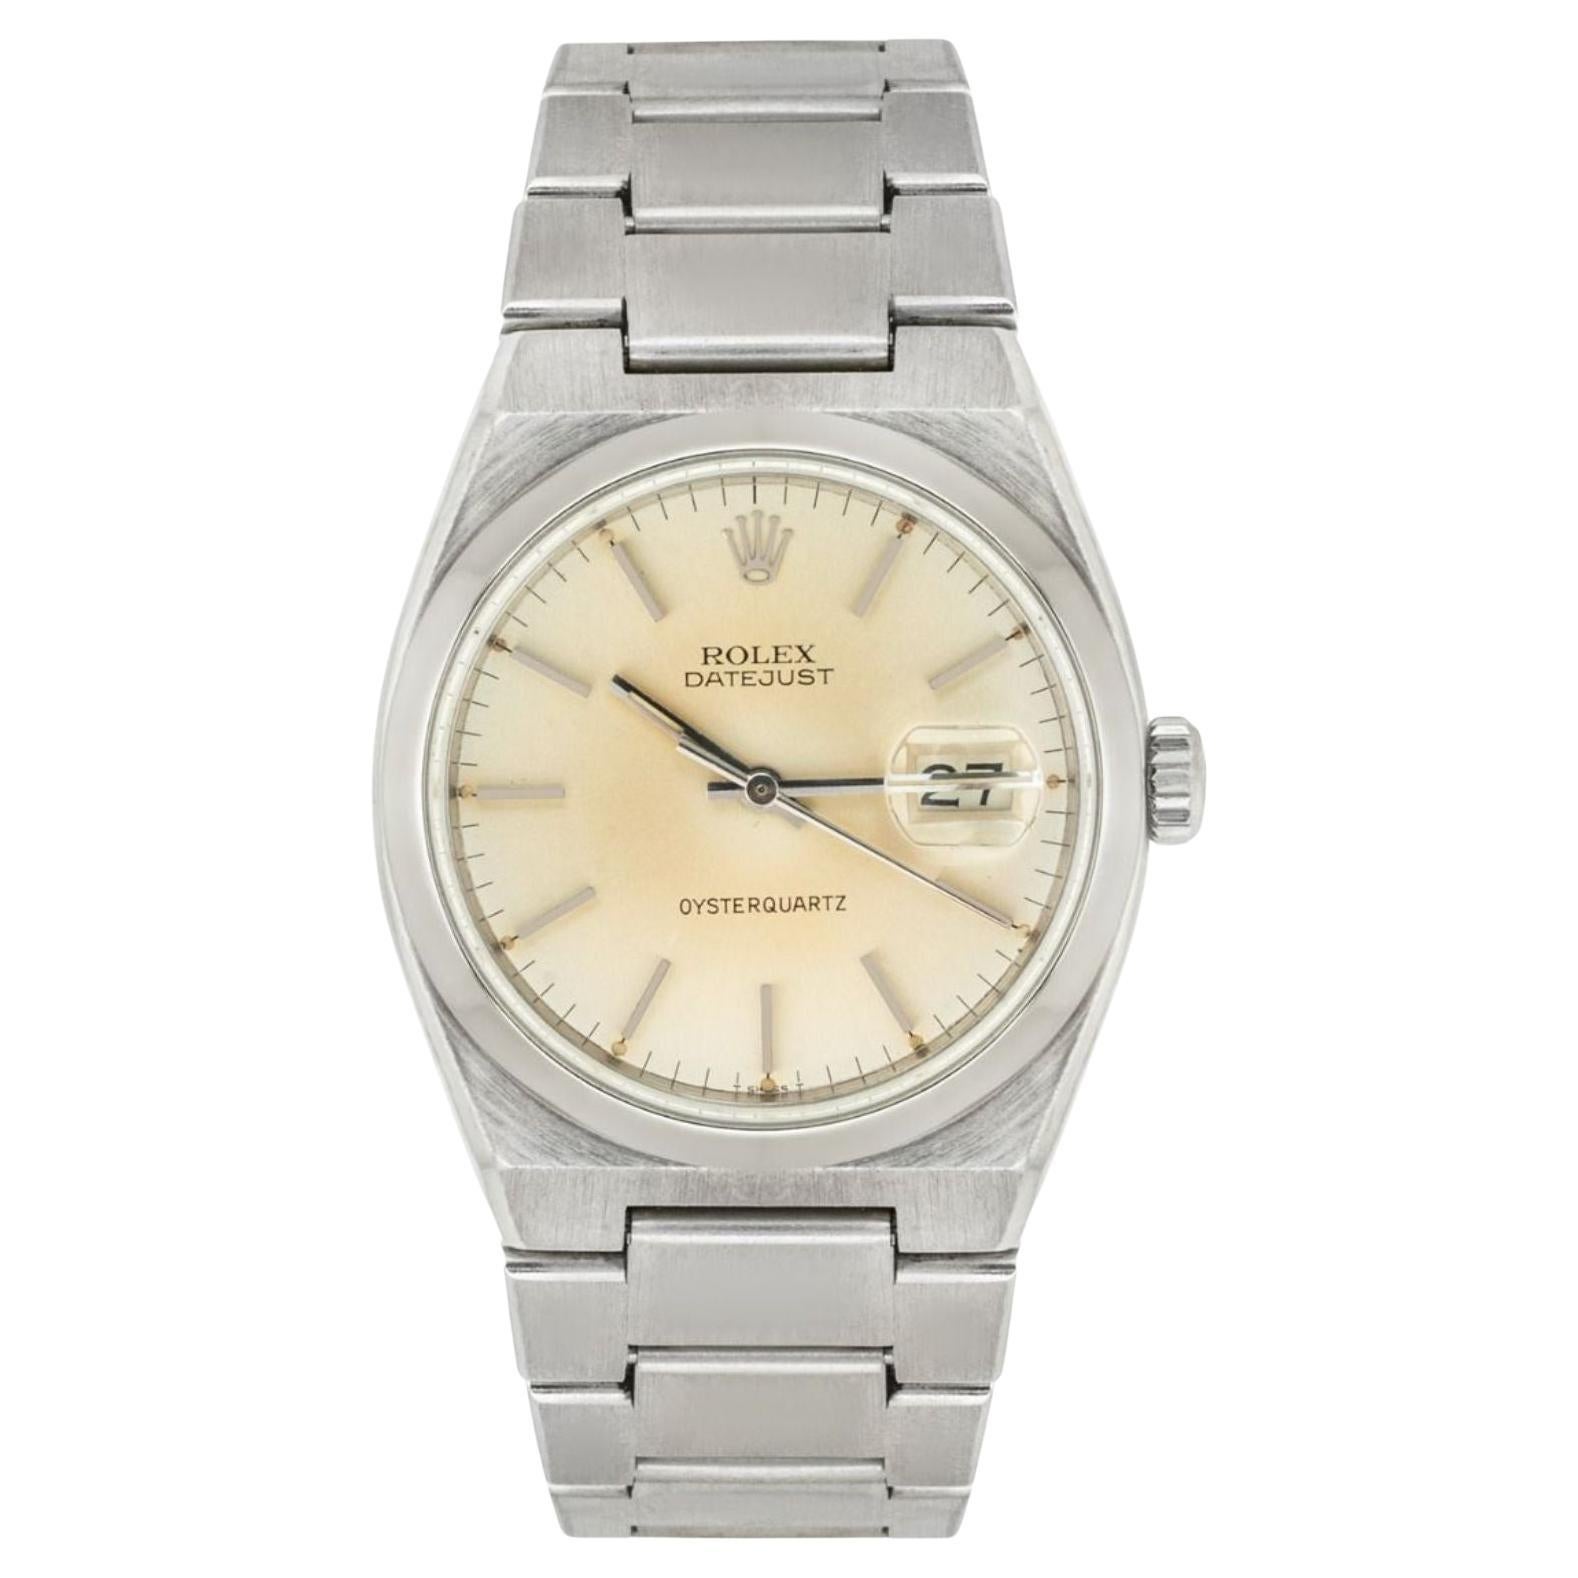 Rolex 17000 - 6 For Sale on 1stDibs | rolex oysterquartz 17000 for sale,  rolex 17000 oysterquartz, rolex oysterquartz datejust 17000